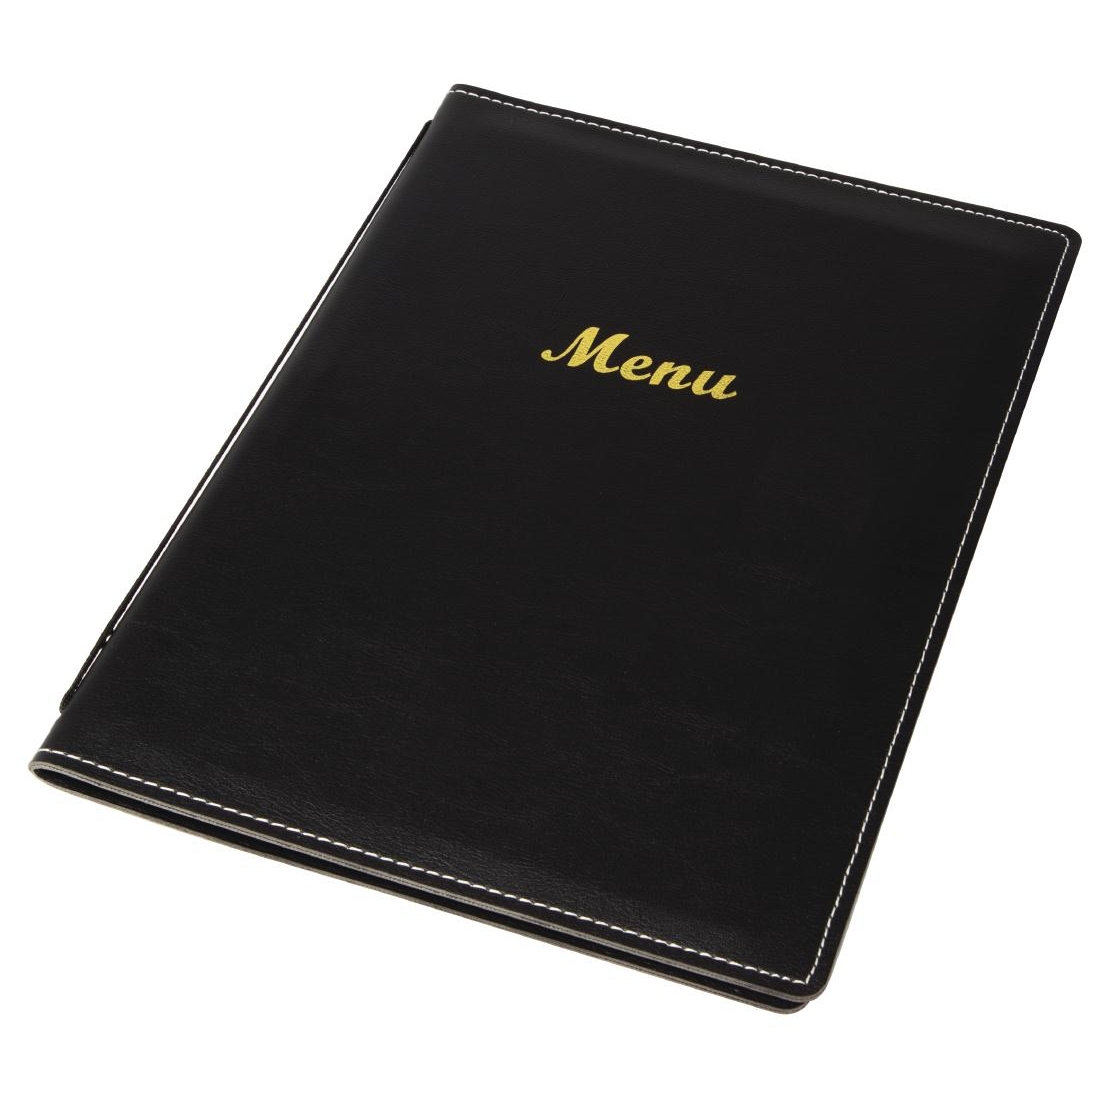 Olympia Faux Leather Menu Cover A5 Black